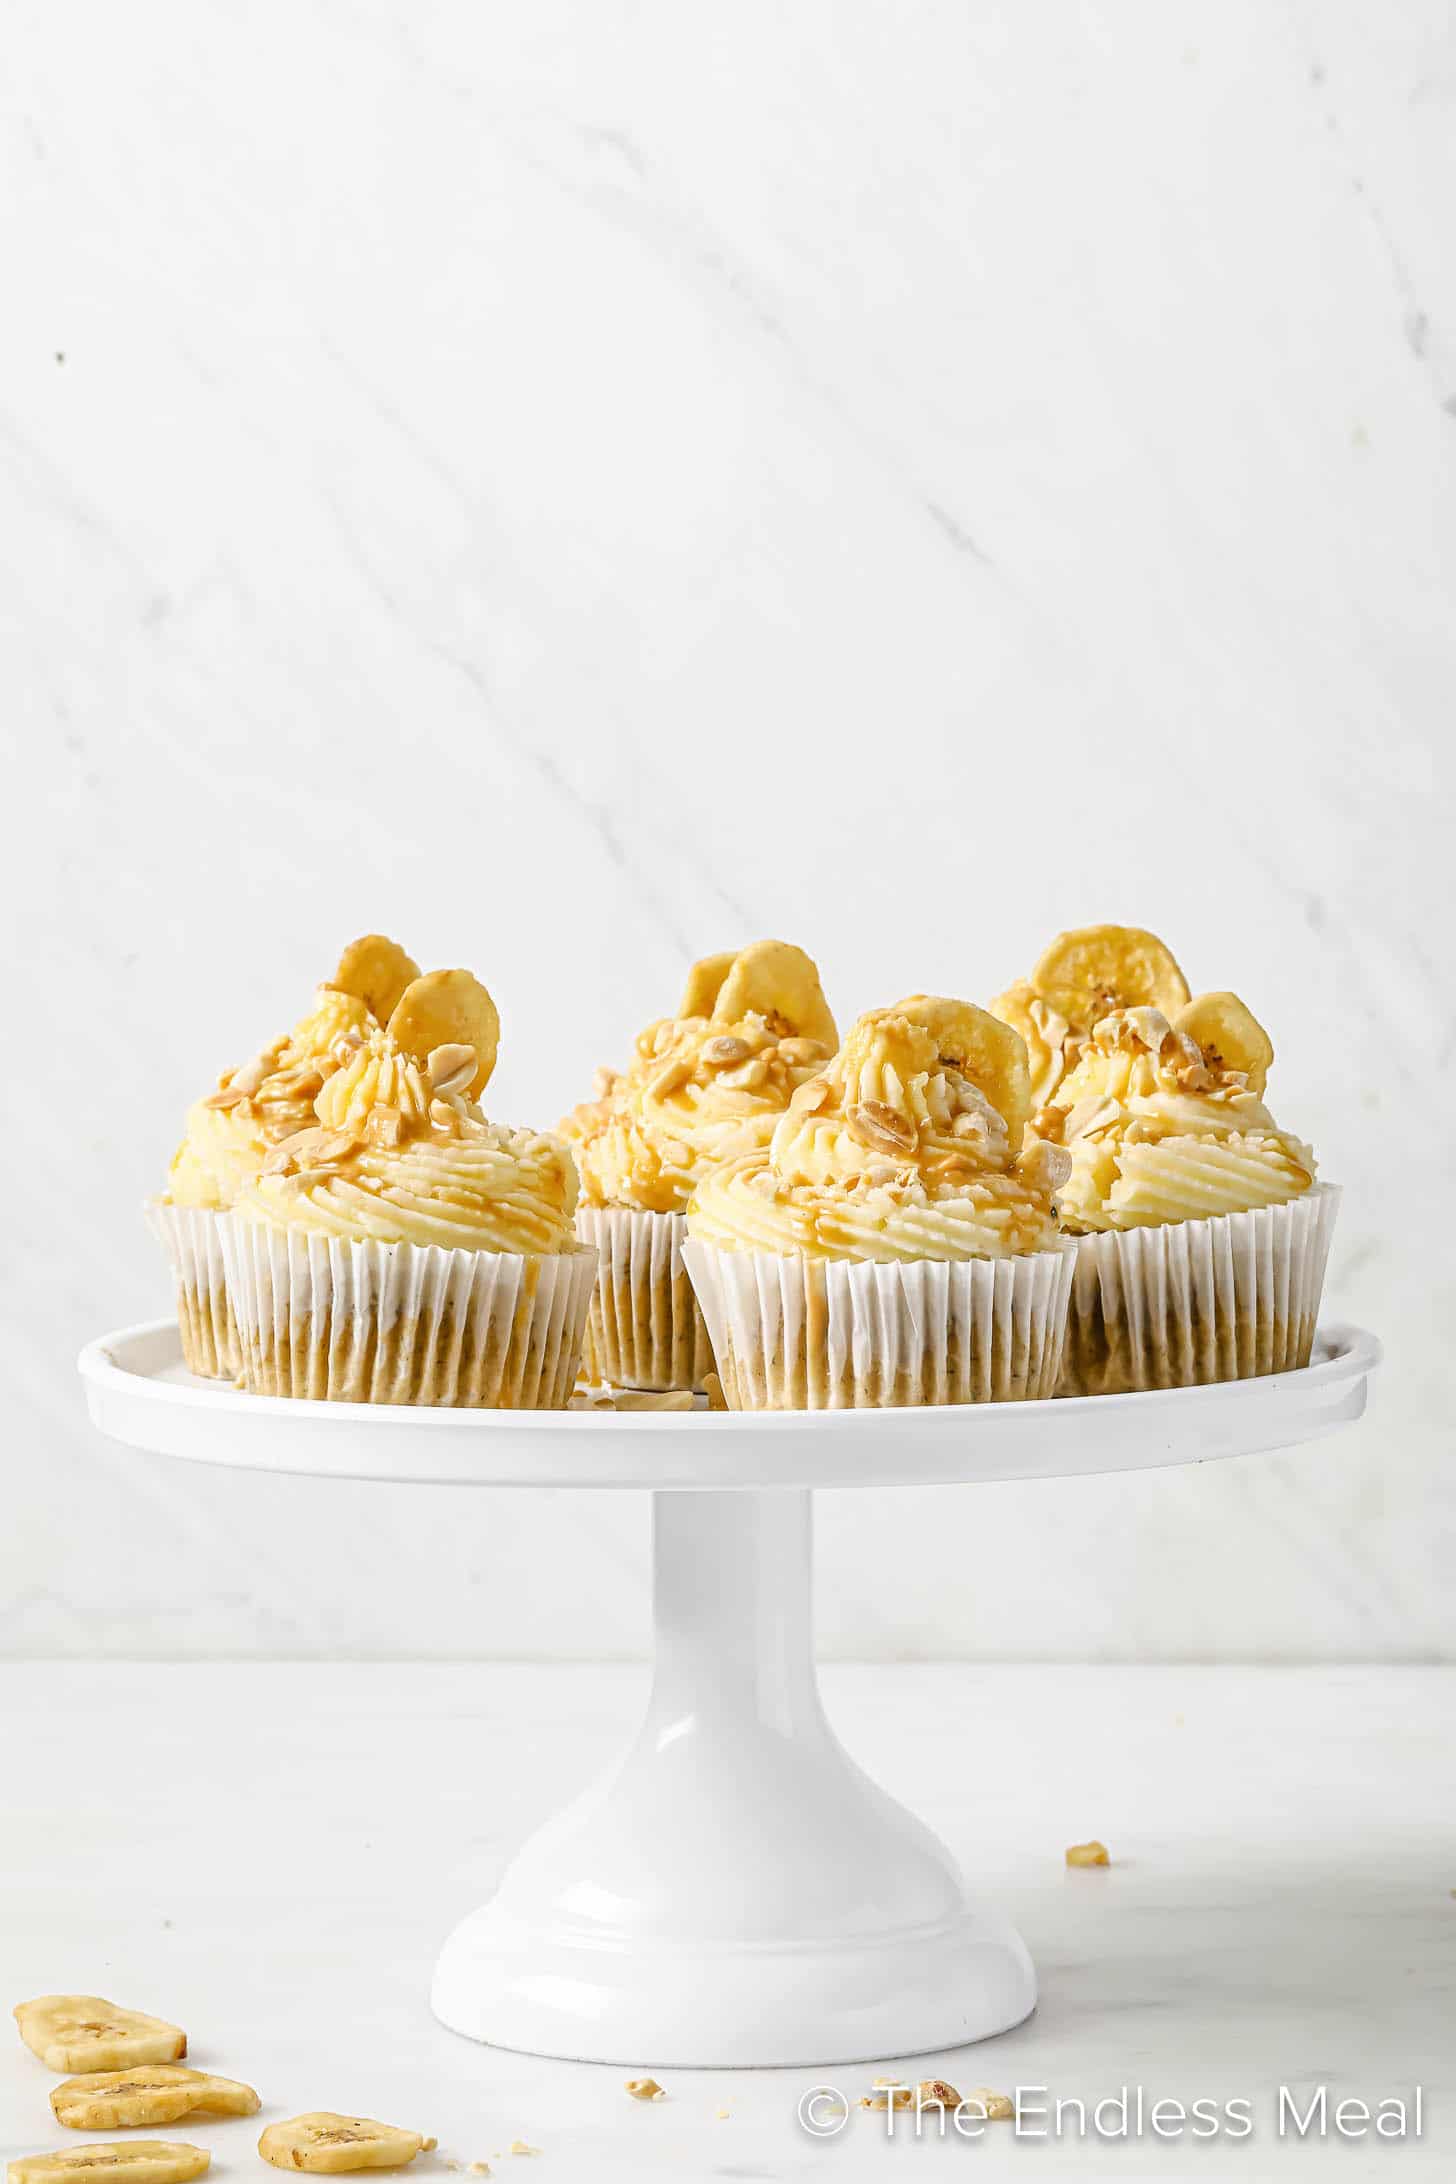 A cake stand with Peanut Butter Banana Cupcakes on top.